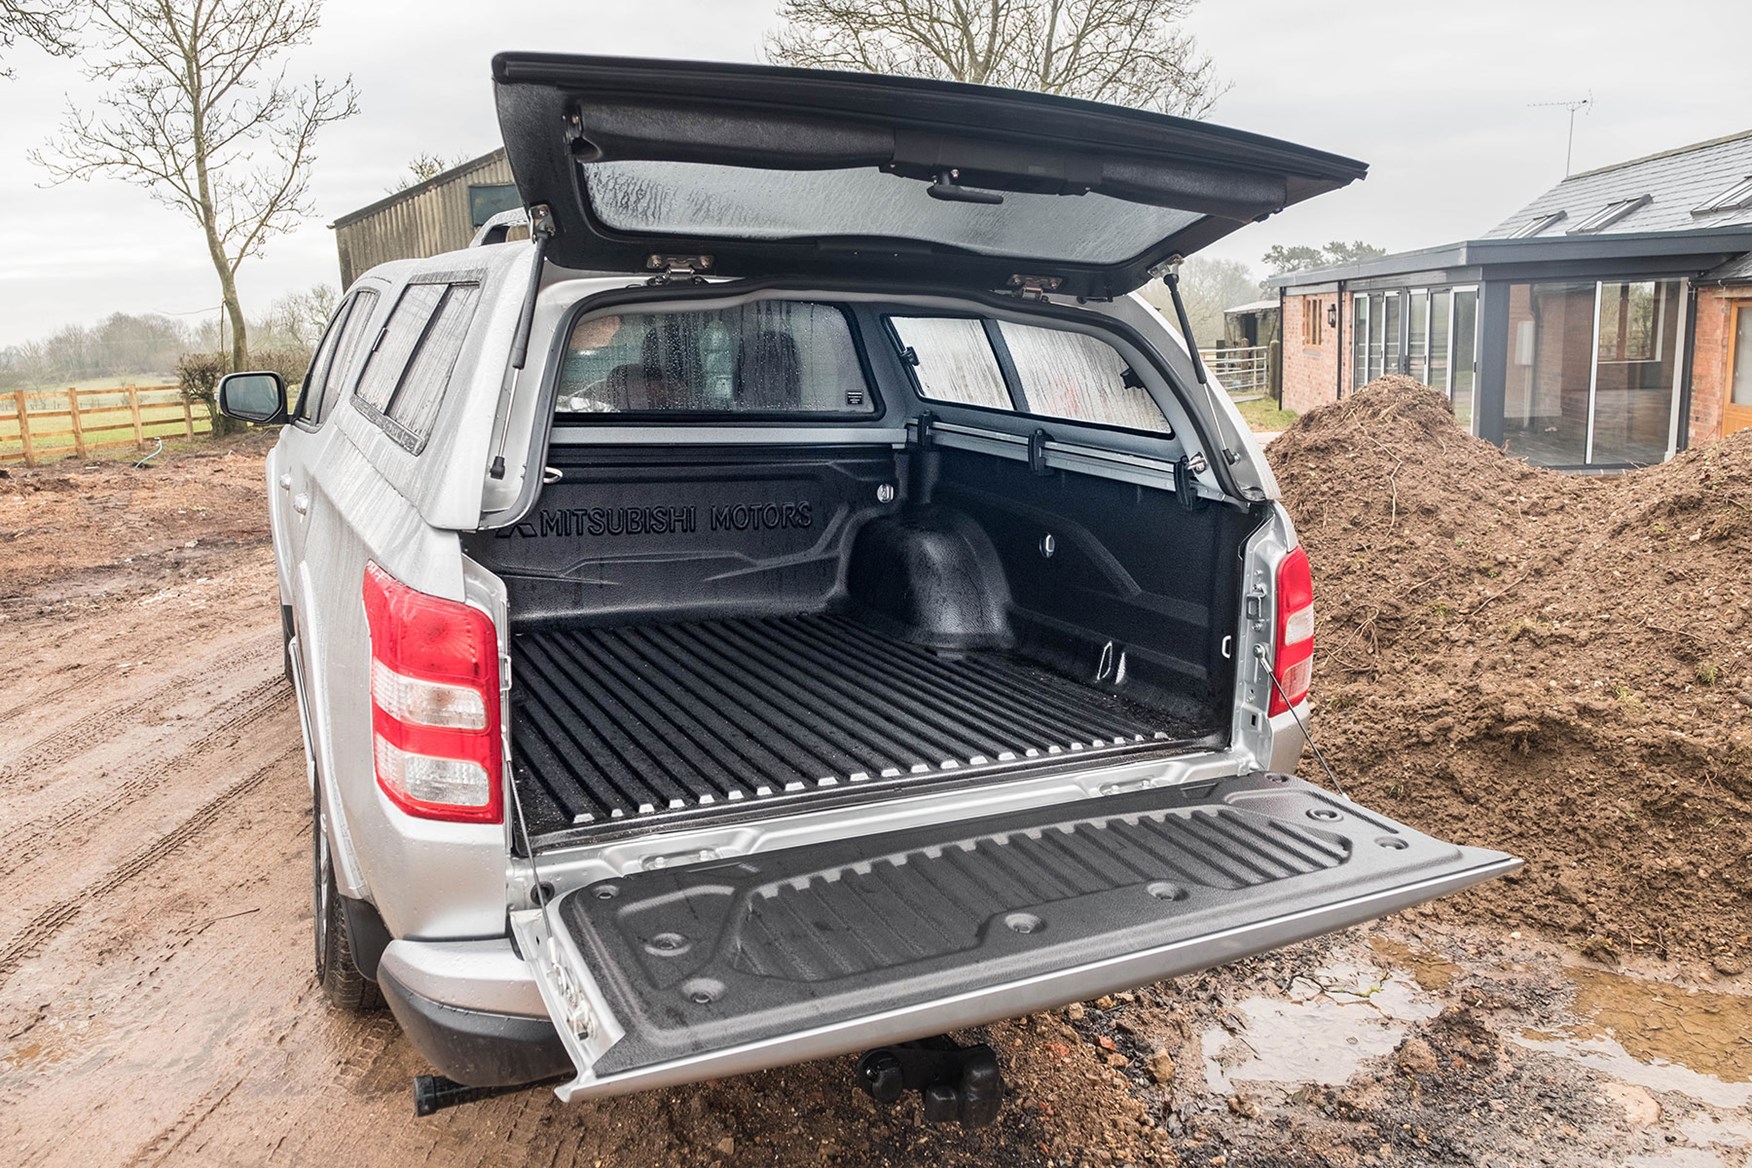 Mistubishi L200 Warrior 2018 review - rear view with Truckman top, silver, tailgates open